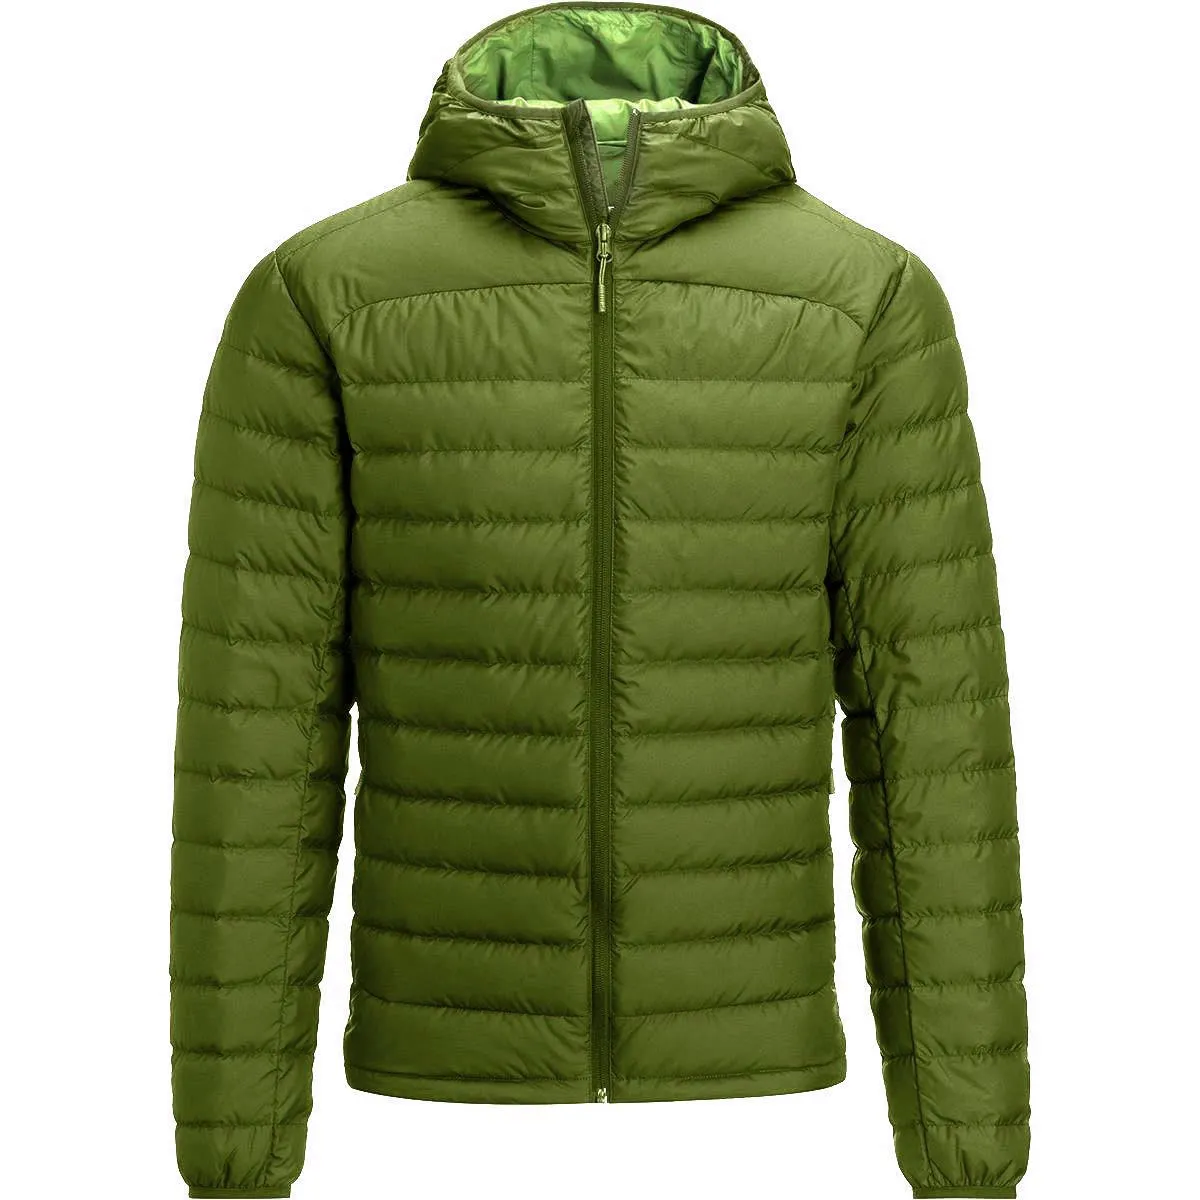 2022 Winter Cheap OEM ODM Unisex New Fashion Puffer Jacket With Hood Customized Size, Color And Logo